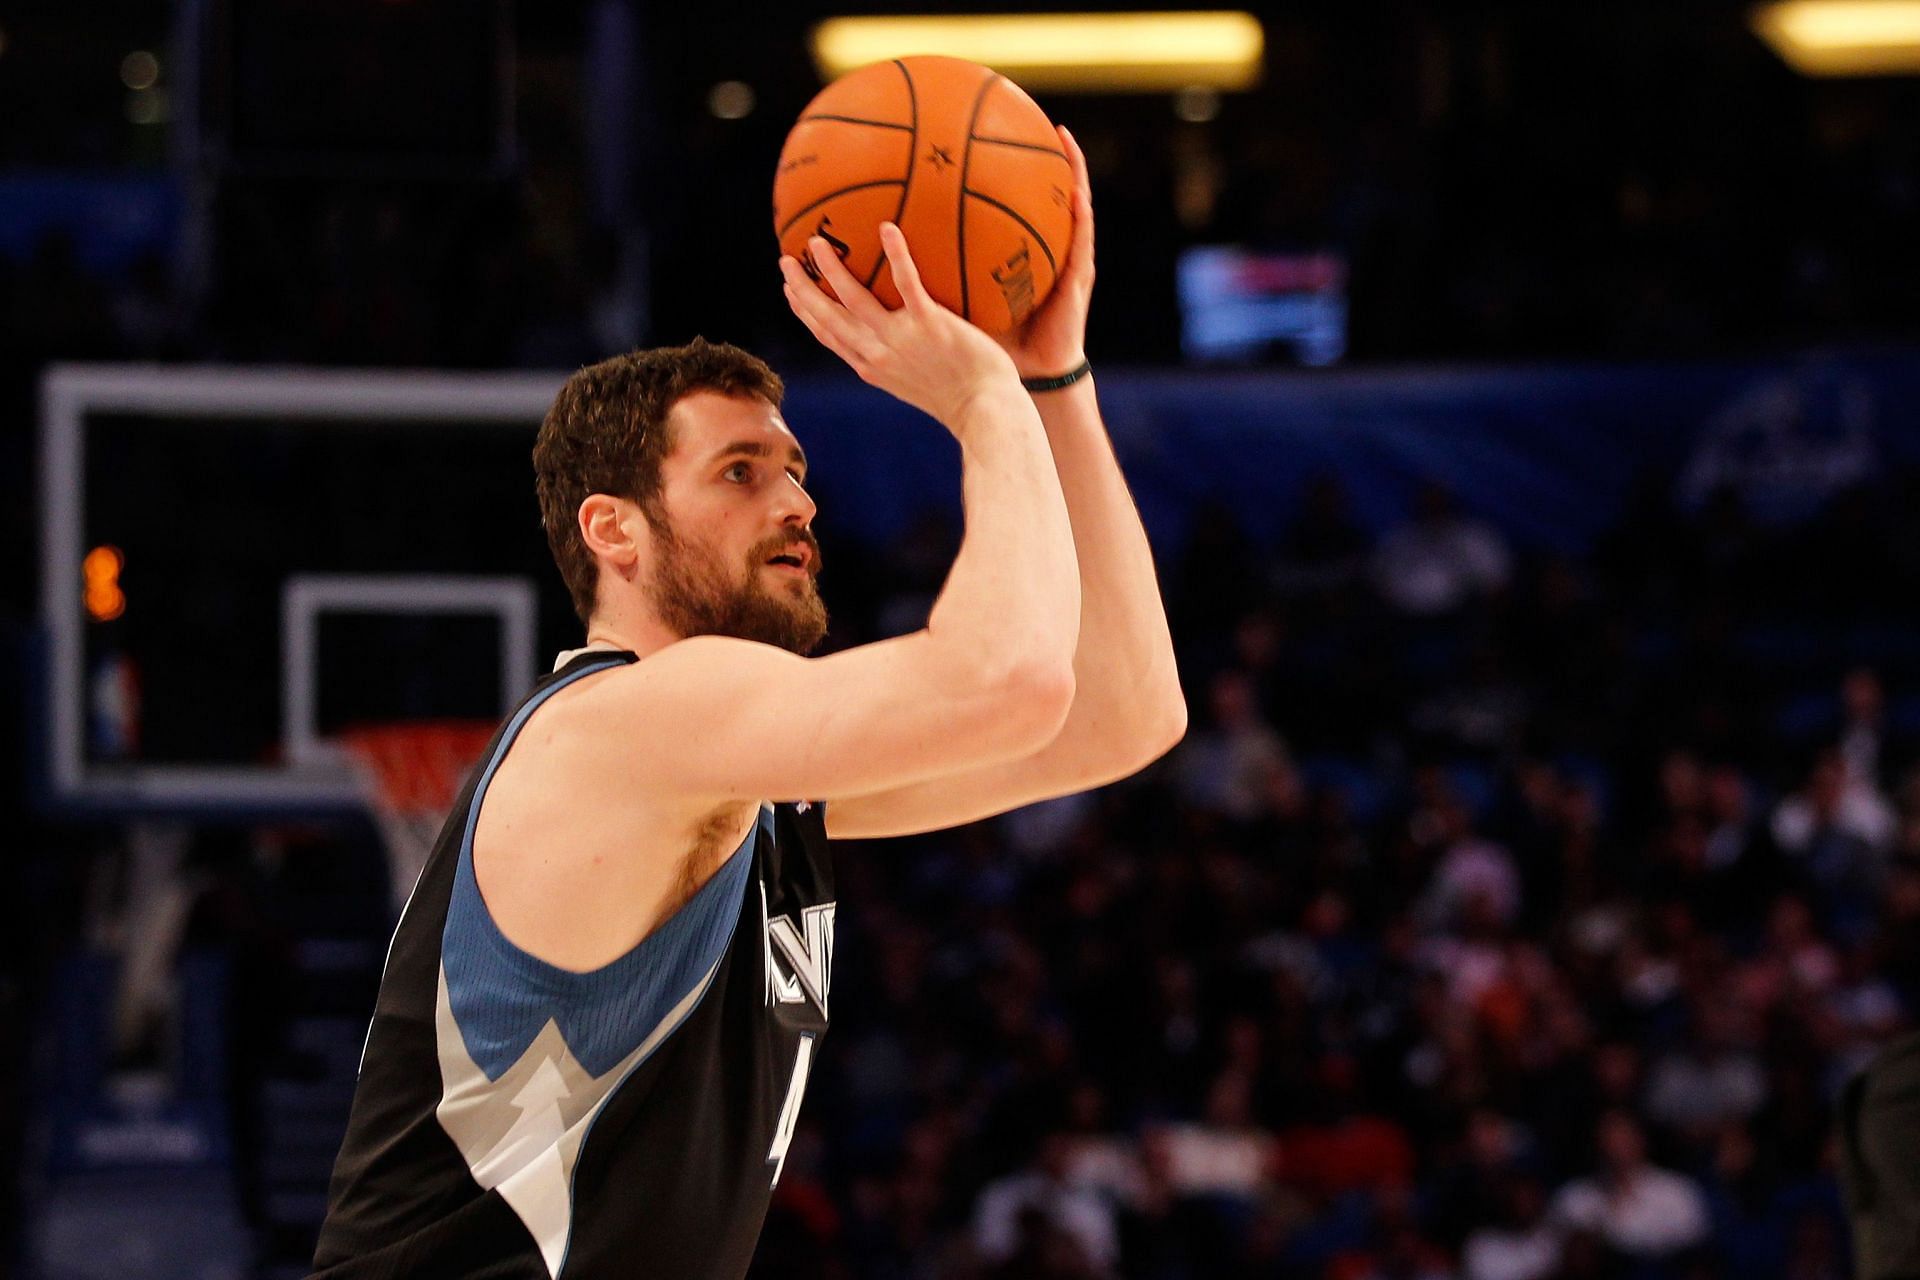 Kevin Love playing for the Minnesota Timberwolves